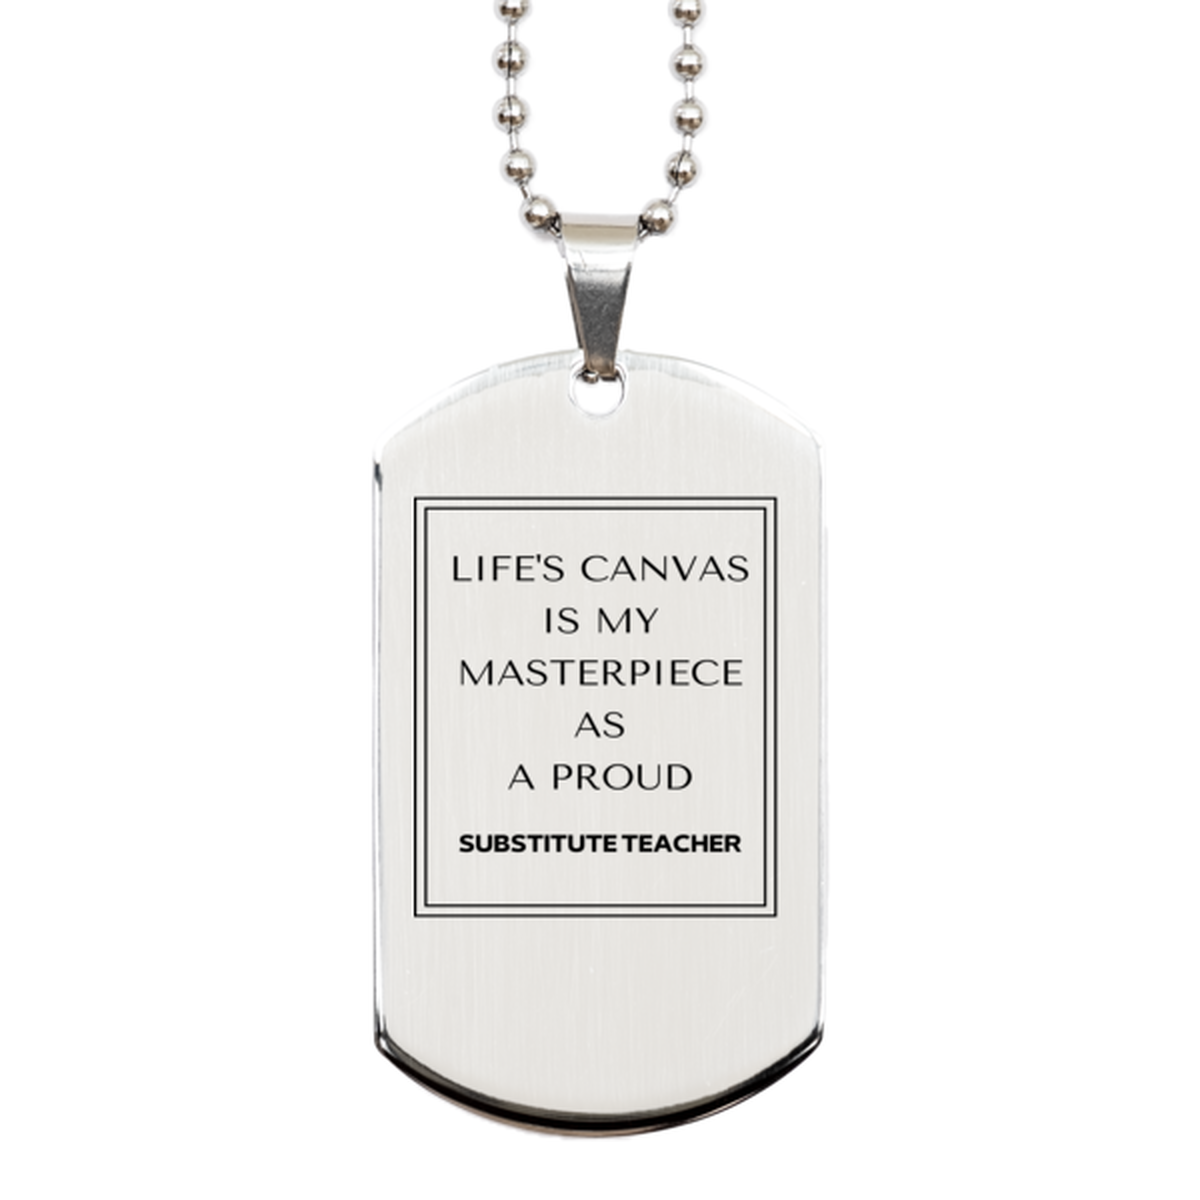 Proud Substitute Teacher Gifts, Life's canvas is my masterpiece, Epic Birthday Christmas Unique Silver Dog Tag For Substitute Teacher, Coworkers, Men, Women, Friends